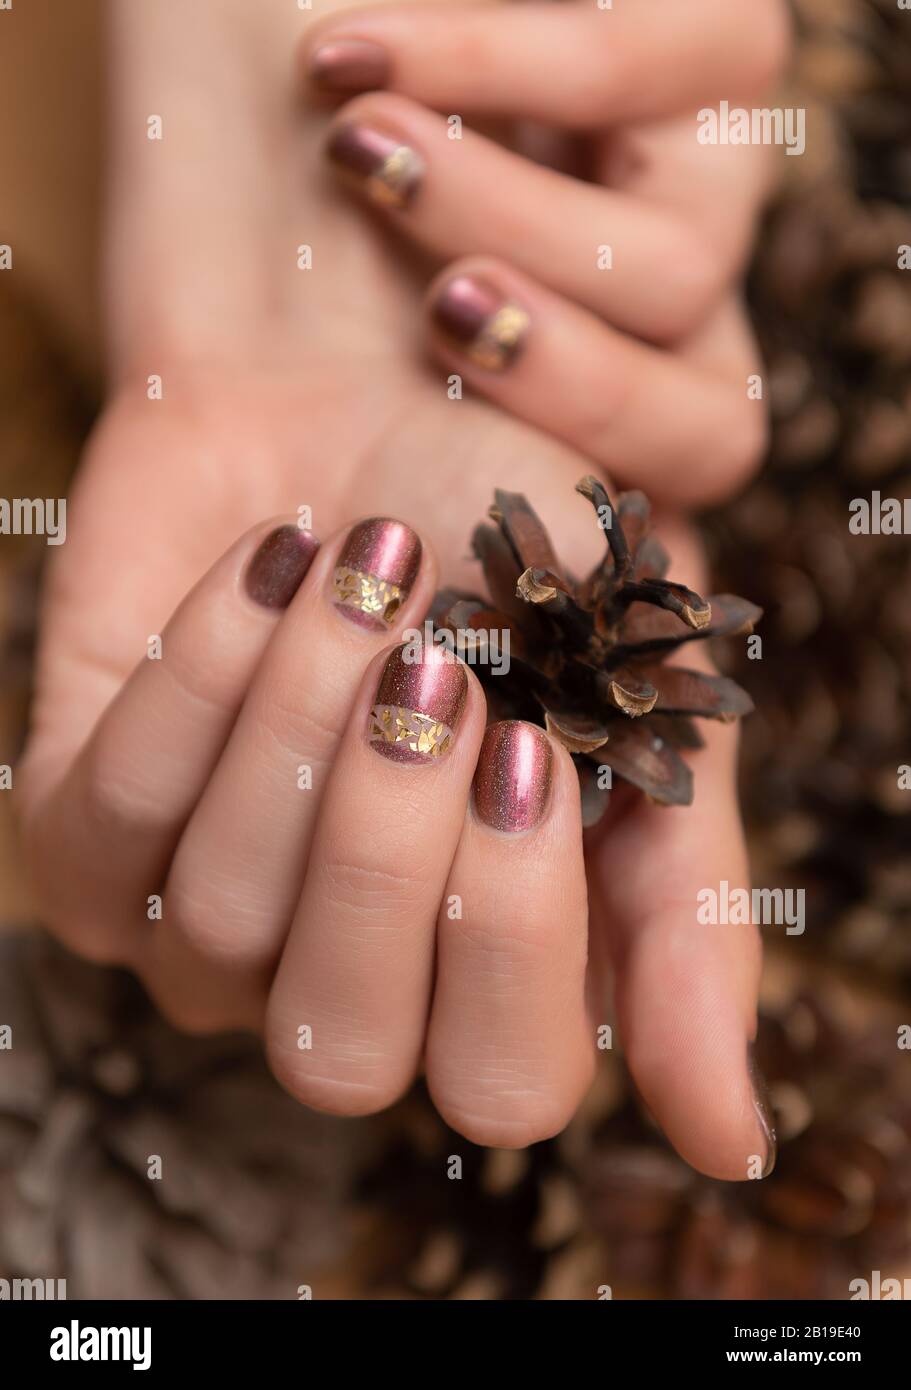 Female hand with brown glitter nail design holding pane cone. Stock Photo